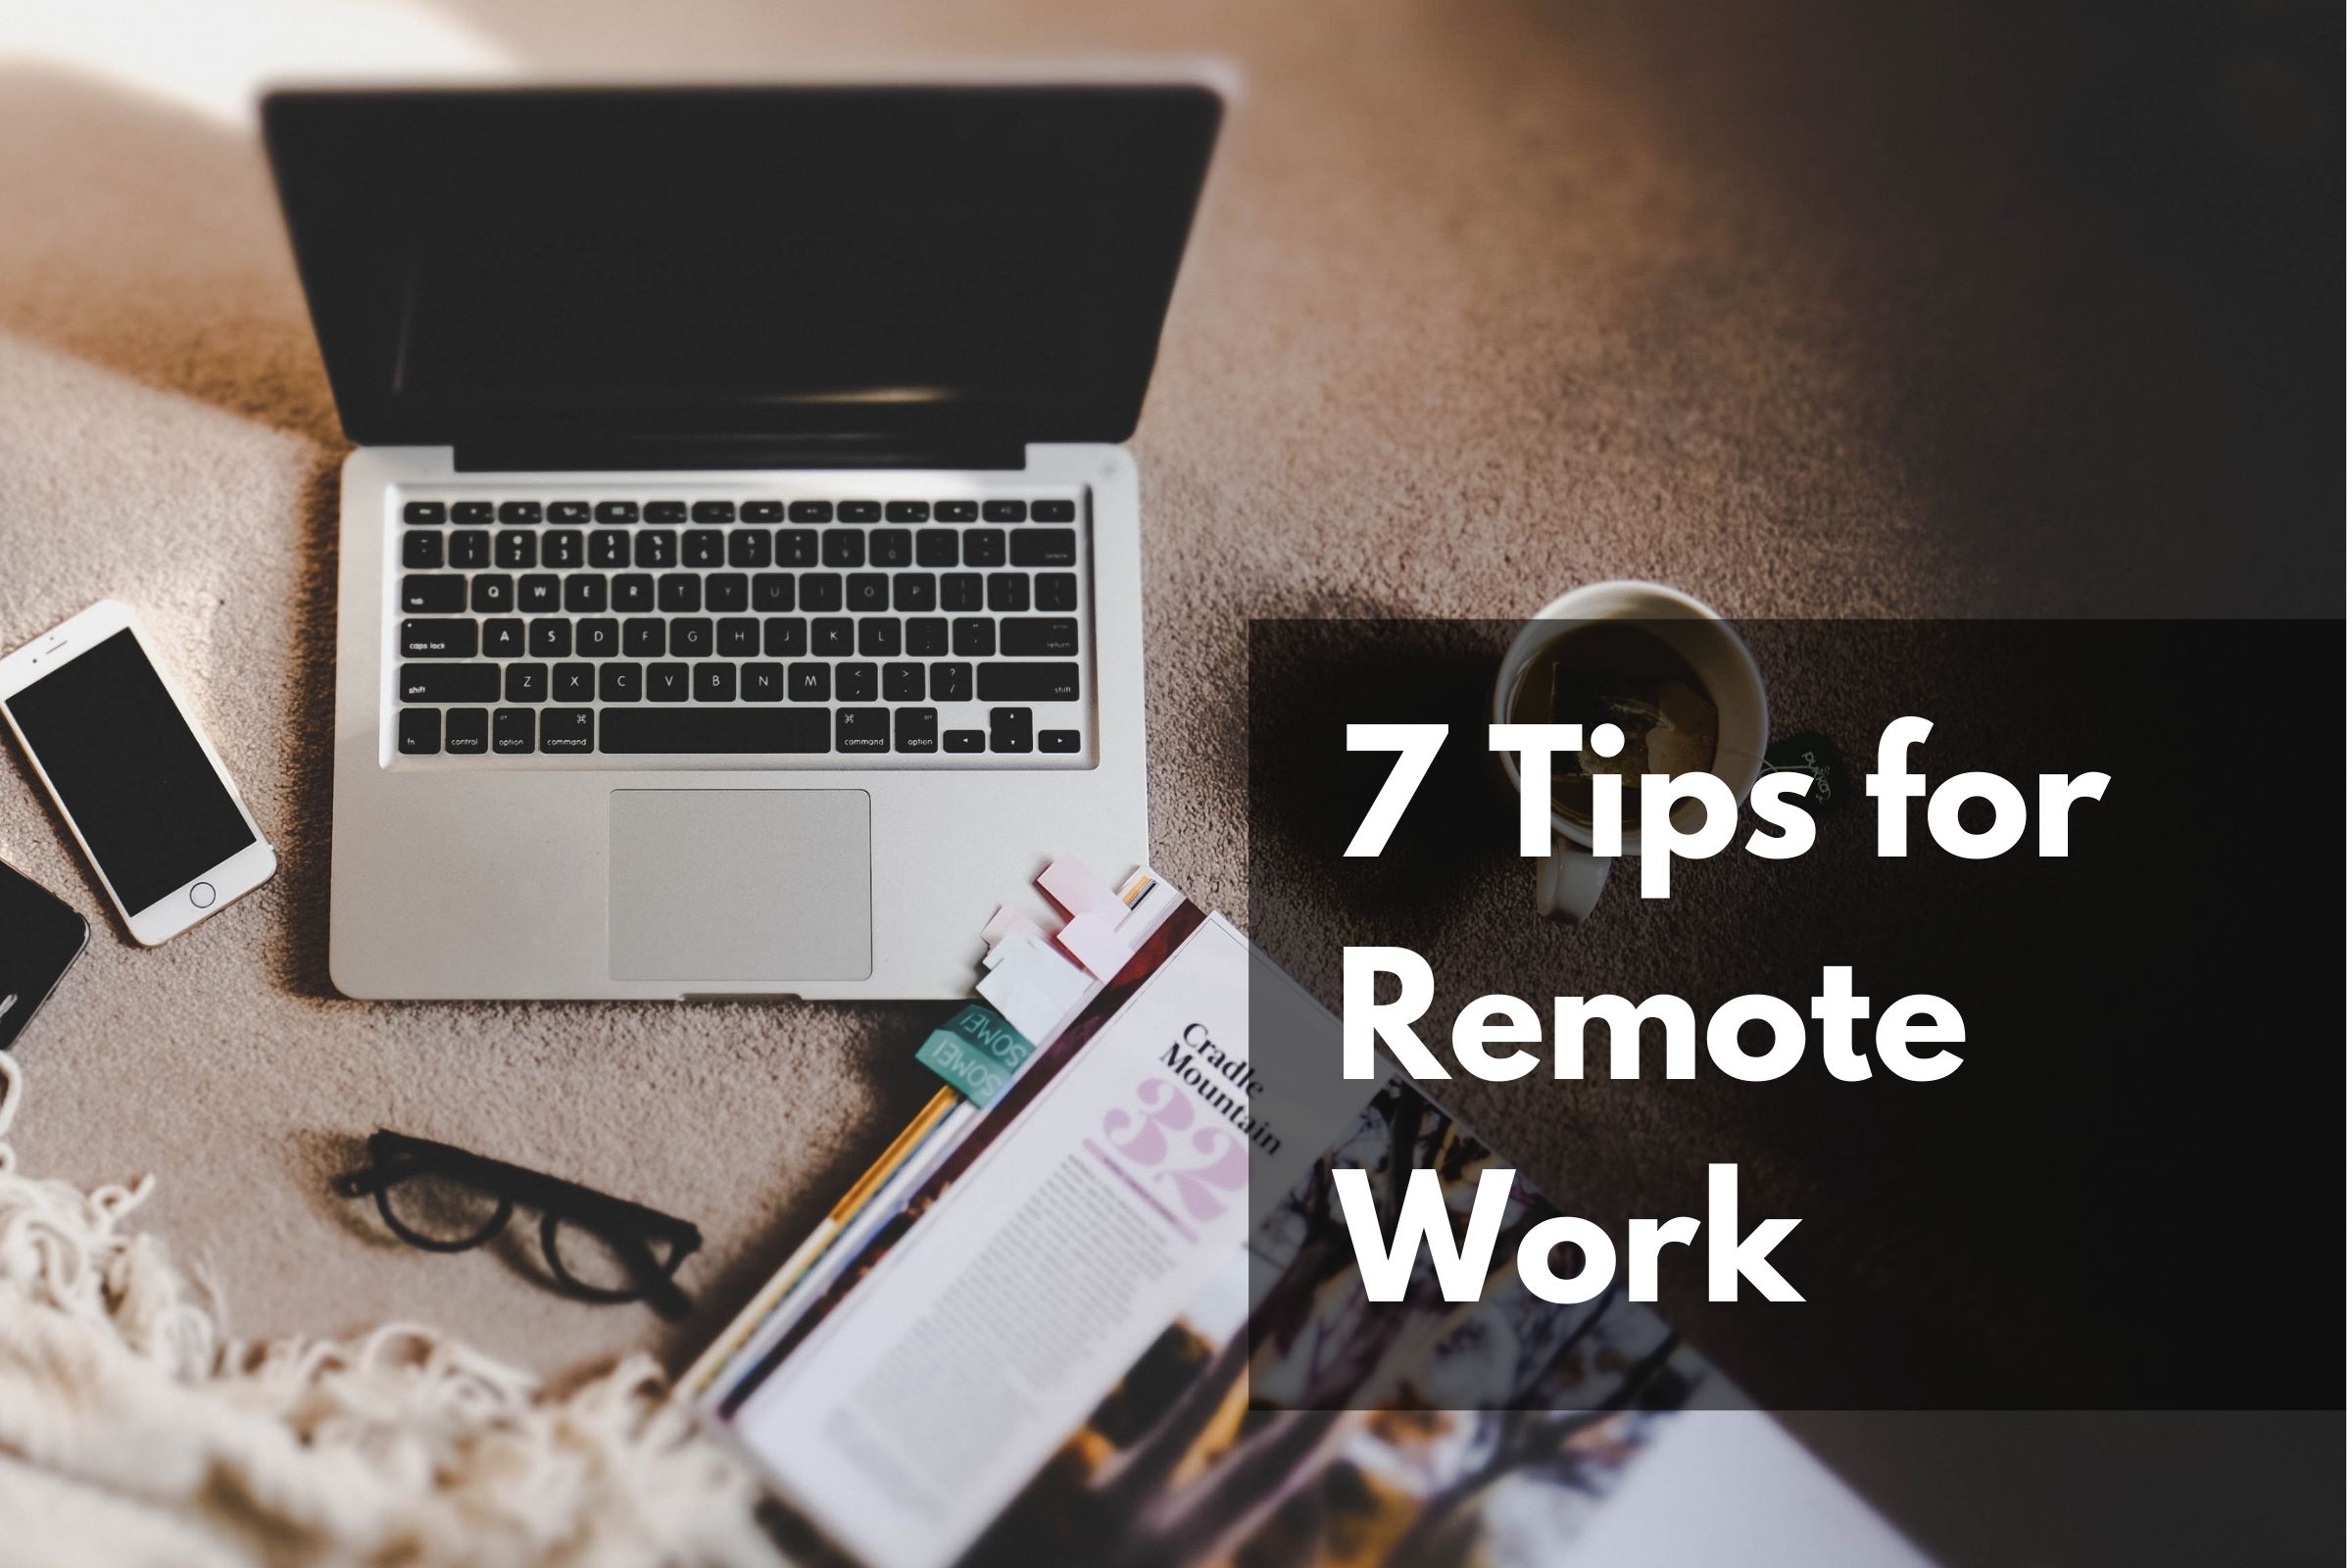 7 Tips for Remote Work